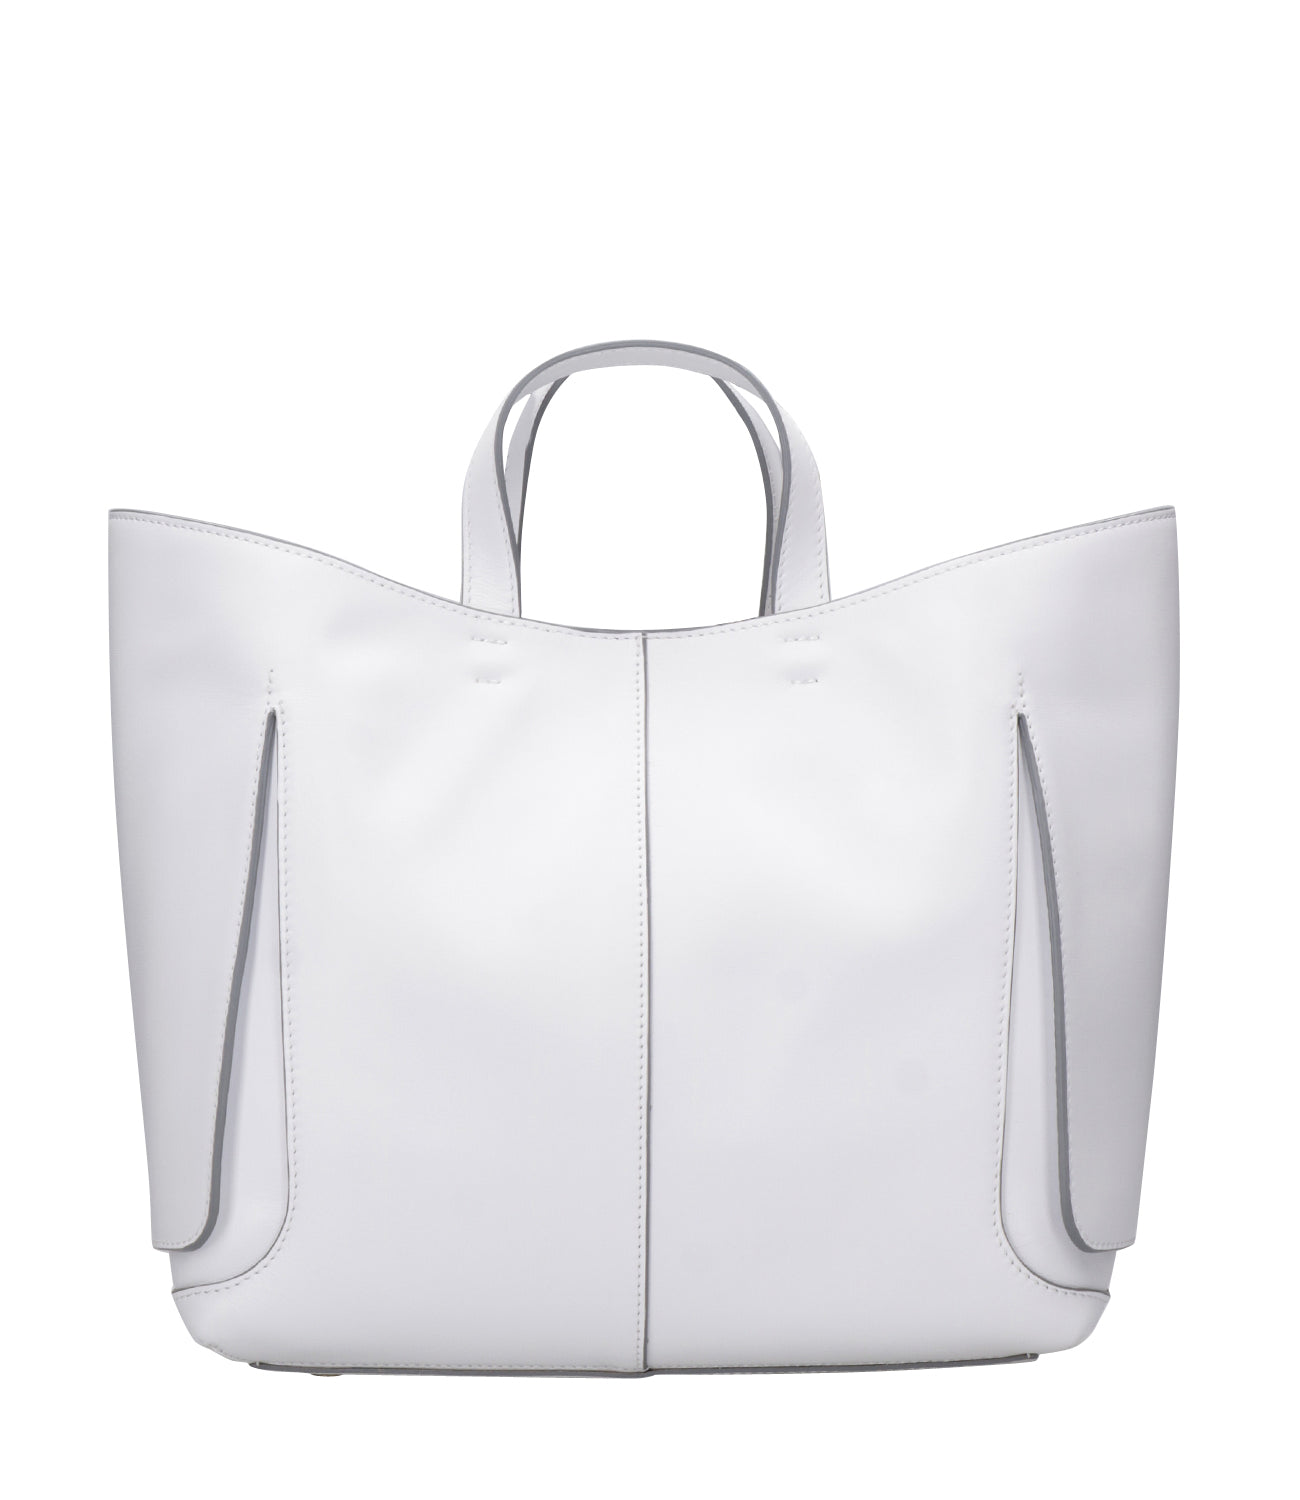 Orciani | Vulona Couture Bag White